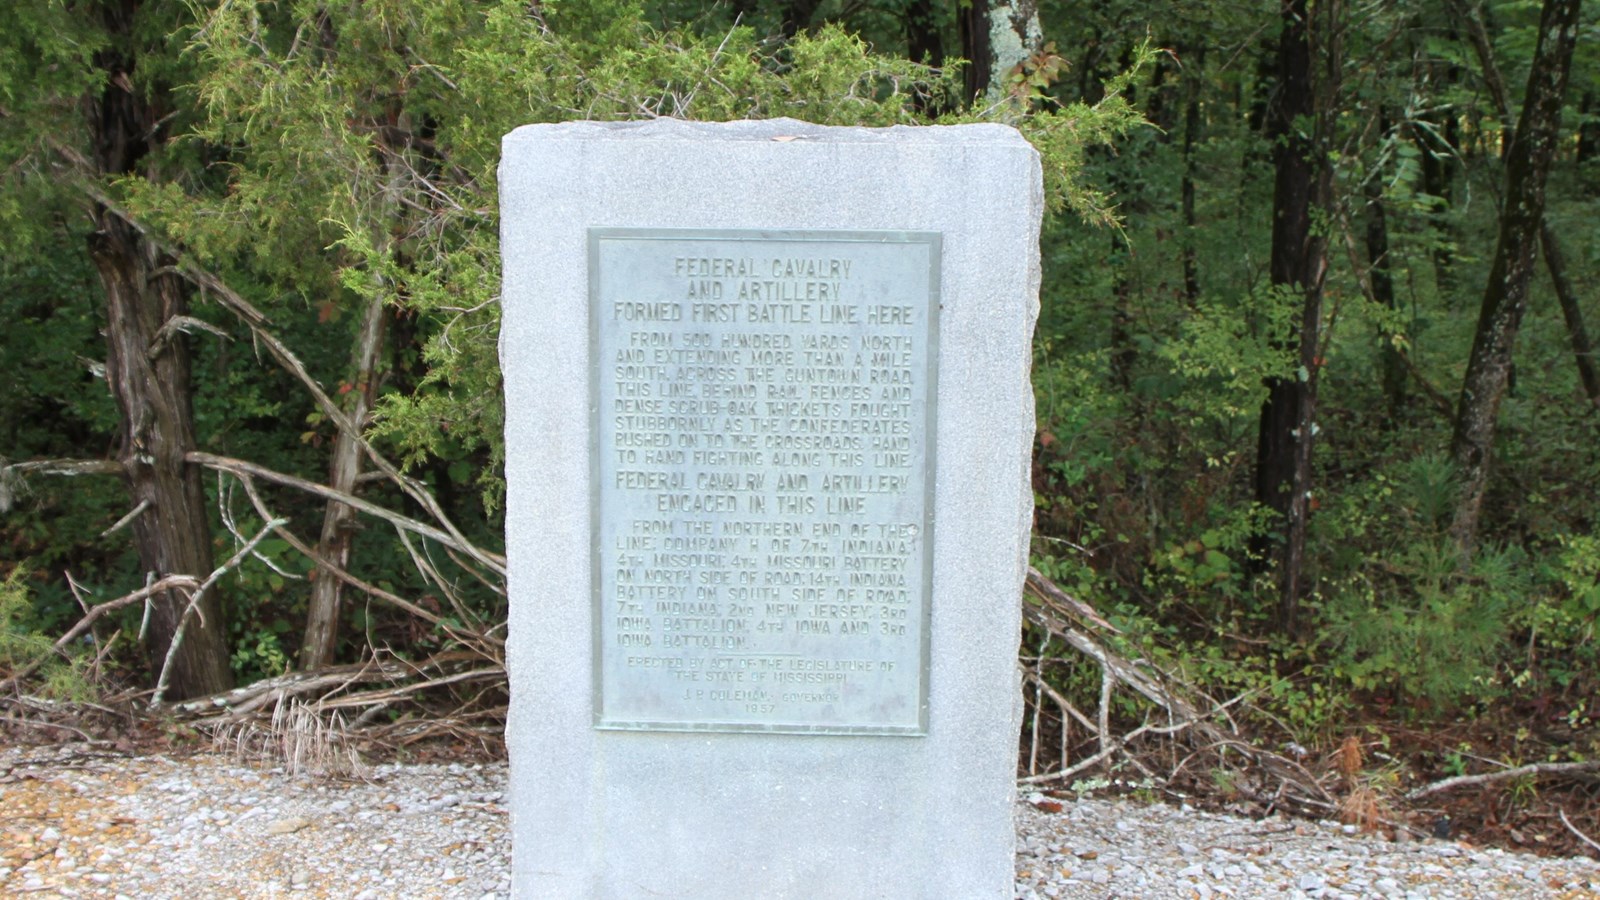 4 foot tall granite marker at edge of parking area. Thicket of trees behind marker. 